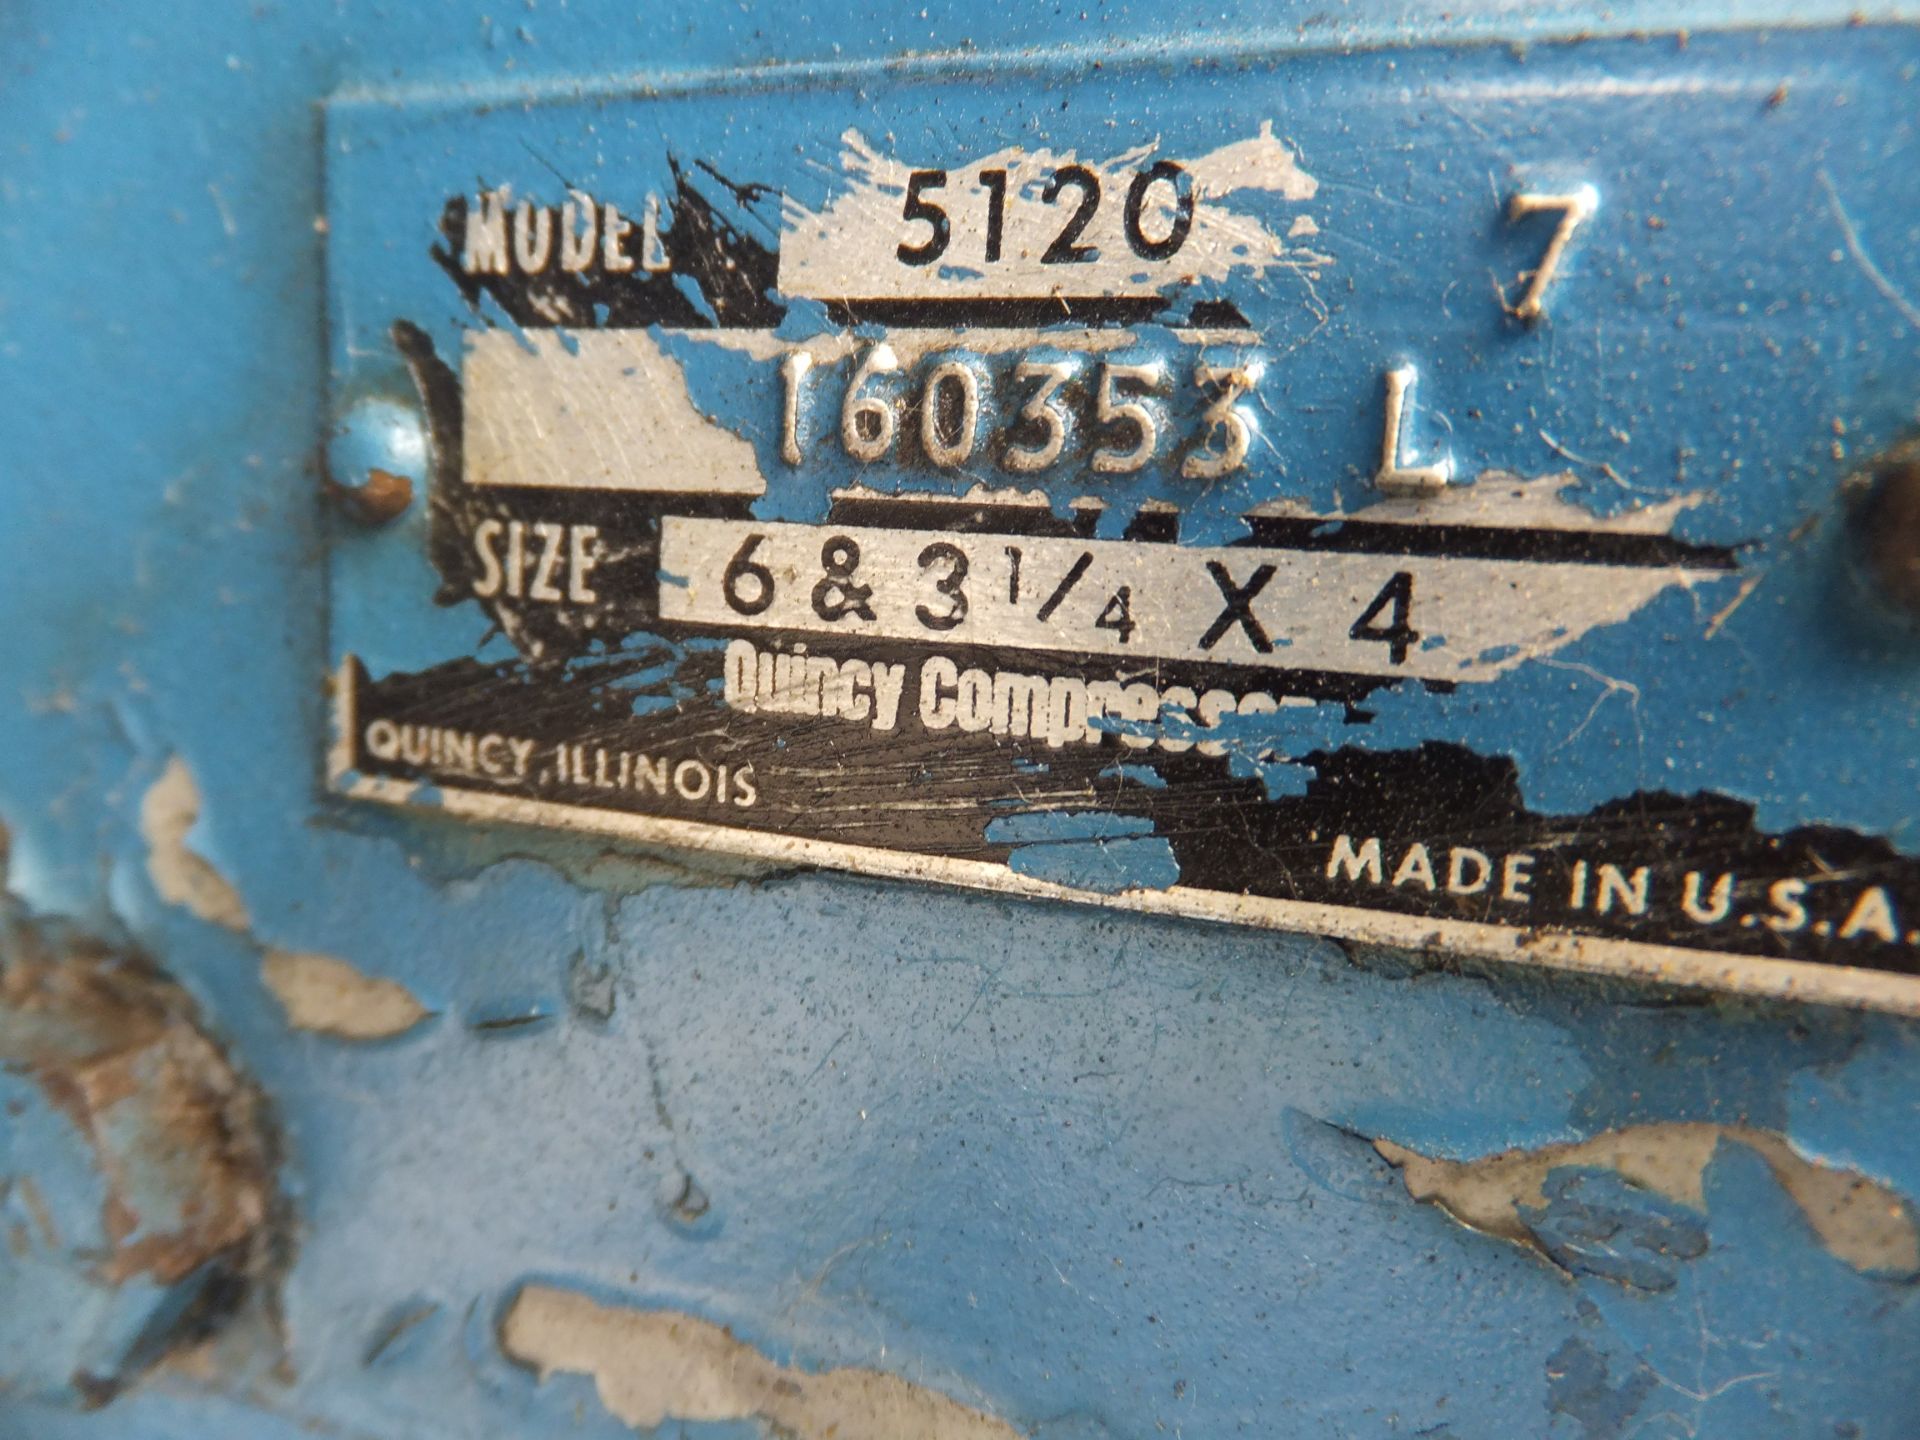 Quincy 25 Hp Reciprocating Air Compressor, Model 5120, S/N 160353 L, Size 6 & 3-1/4 x 4, Lincoln - Image 9 of 10